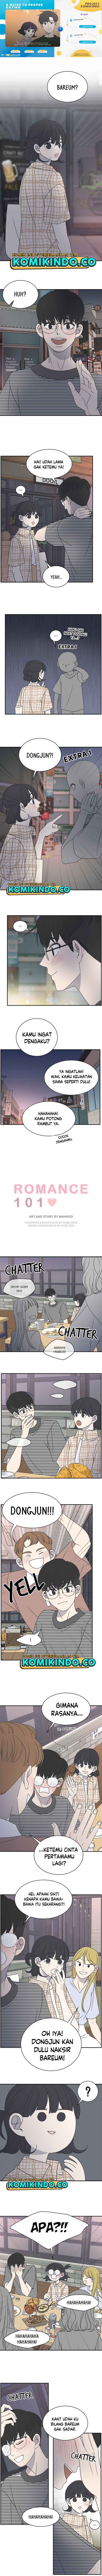 A Guide to Proper Dating Chapter 81